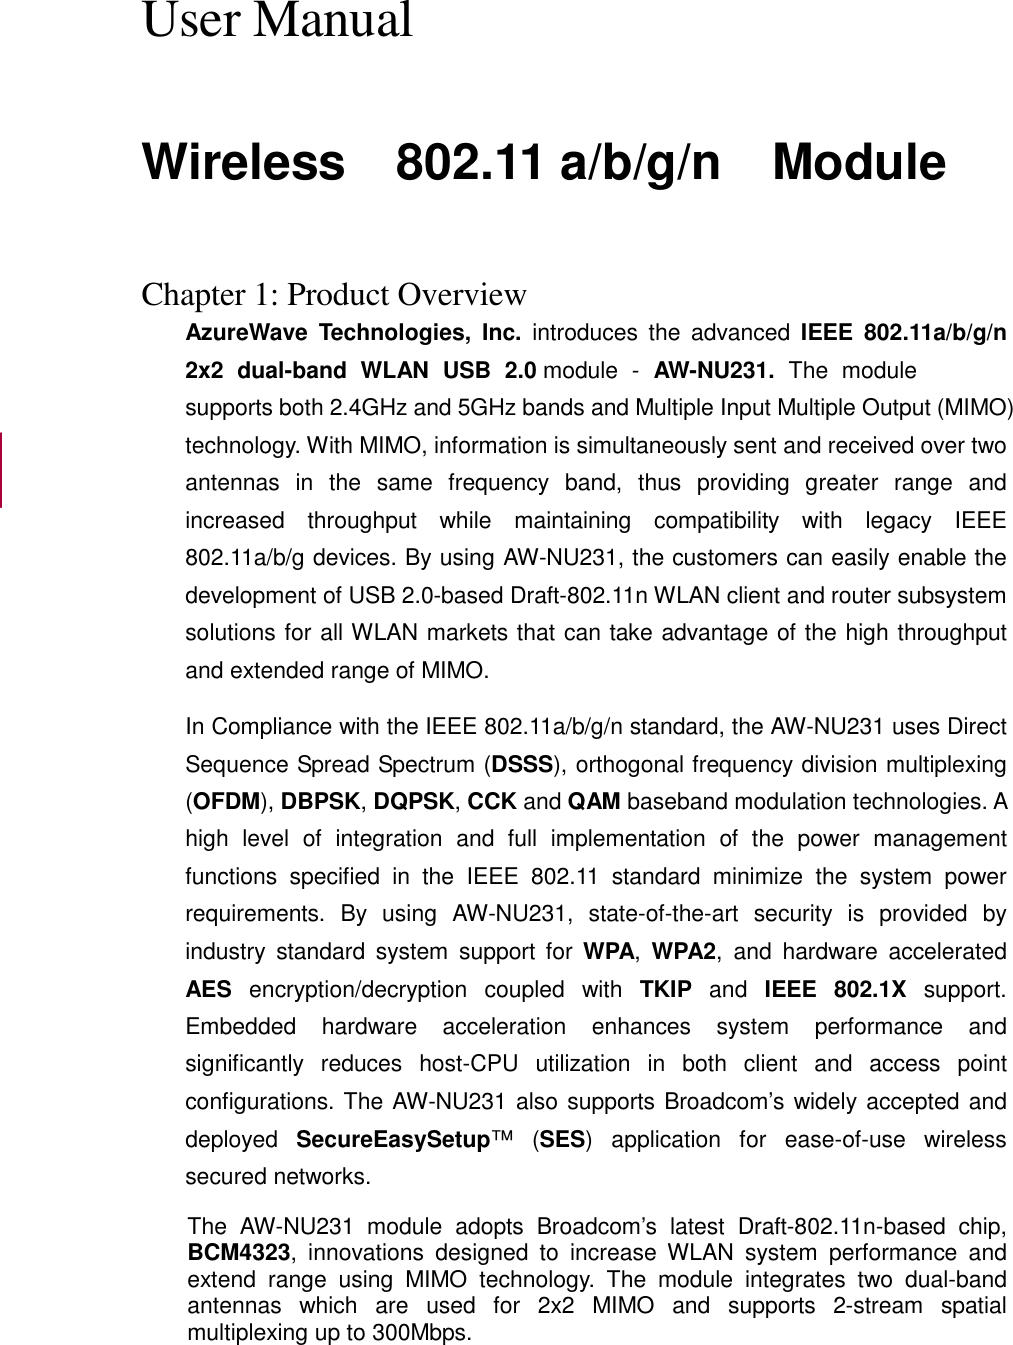  User Manual  Wireless    802.11 a/b/g/n    Module   Chapter 1: Product Overview AzureWave  Technologies,  Inc.  introduces  the  advanced  IEEE  802.11a/b/g/n 2x2  dual-band  WLAN  USB  2.0 module  -  AW-NU231.  The  module supports both 2.4GHz and 5GHz bands and Multiple Input Multiple Output (MIMO) technology. With MIMO, information is simultaneously sent and received over two antennas  in  the  same  frequency  band,  thus  providing  greater  range  and increased  throughput  while  maintaining  compatibility  with  legacy  IEEE 802.11a/b/g devices. By using AW-NU231, the customers can easily enable the development of USB 2.0-based Draft-802.11n WLAN client and router subsystem solutions for all WLAN markets that can take advantage of the high throughput and extended range of MIMO. In Compliance with the IEEE 802.11a/b/g/n standard, the AW-NU231 uses Direct Sequence Spread Spectrum (DSSS), orthogonal frequency division multiplexing (OFDM), DBPSK, DQPSK, CCK and QAM baseband modulation technologies. A high  level  of  integration  and  full  implementation  of  the  power  management functions  specified  in  the  IEEE  802.11  standard  minimize  the  system  power requirements.  By  using  AW-NU231,  state-of-the-art  security  is  provided  by industry  standard  system  support  for  WPA,  WPA2,  and  hardware  accelerated AES  encryption/decryption  coupled  with  TKIP  and  IEEE  802.1X  support. Embedded  hardware  acceleration  enhances  system  performance  and significantly  reduces  host-CPU  utilization  in  both  client  and  access  point configurations. The AW-NU231 also supports Broadcom’s widely accepted and deployed  SecureEasySetup™  (SES)  application  for  ease-of-use  wireless secured networks. The  AW-NU231  module  adopts  Broadcom’s  latest  Draft-802.11n-based  chip, BCM4323,  innovations  designed  to  increase  WLAN  system  performance  and extend  range  using  MIMO  technology.  The  module  integrates  two  dual-band antennas  which  are  used  for  2x2  MIMO  and  supports  2-stream  spatial multiplexing up to 300Mbps.  